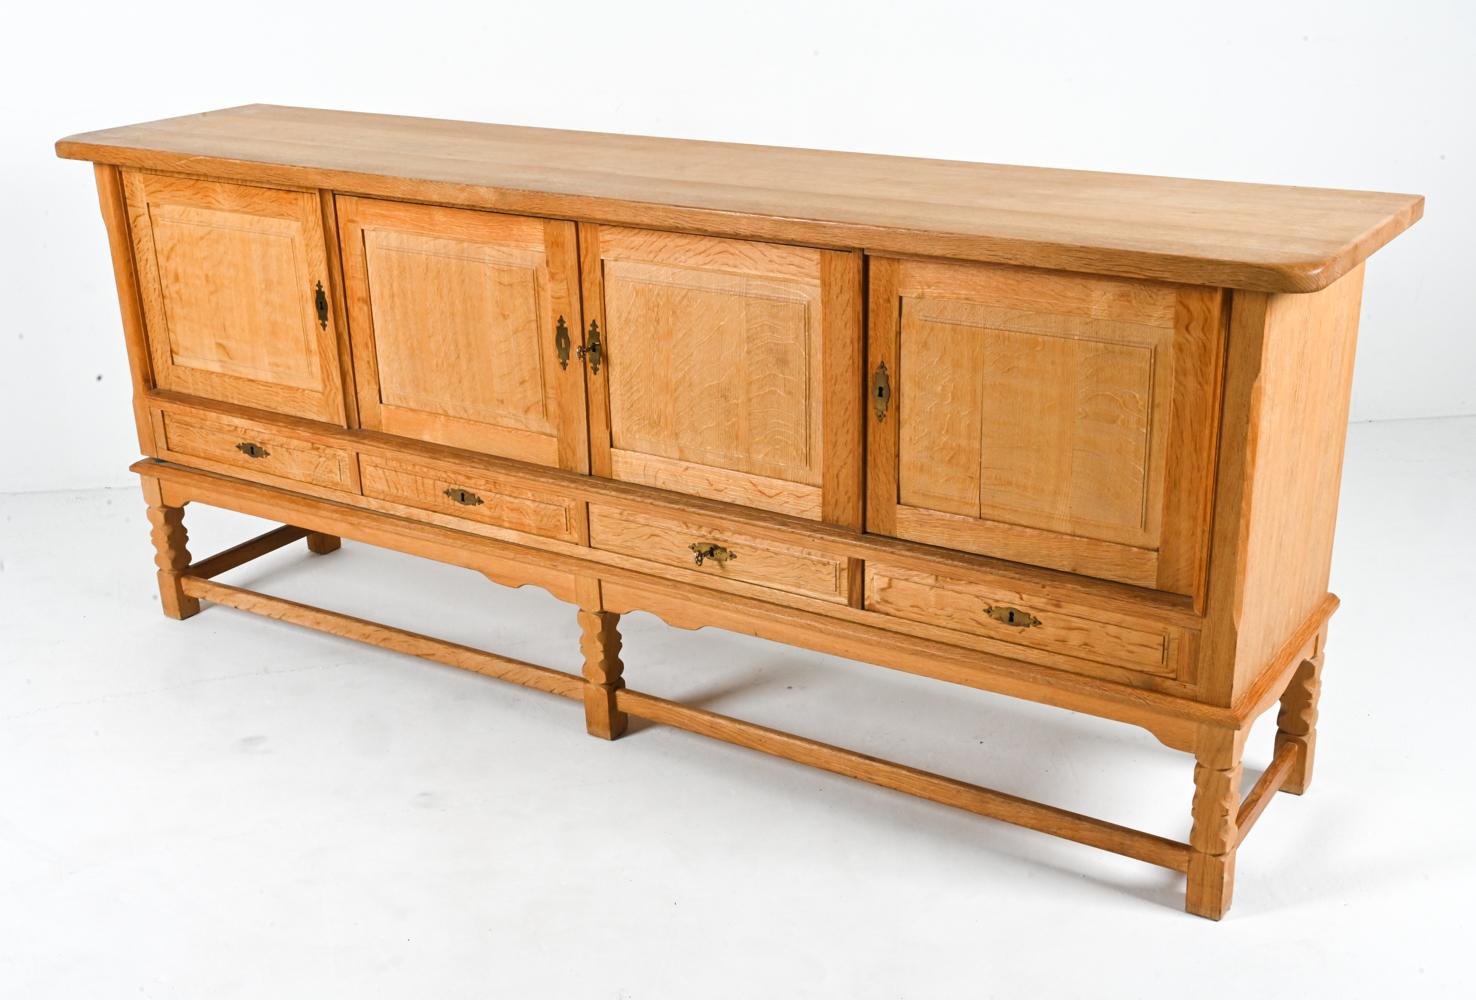 The organic beauty of quarter-sawn white oak takes center stage in this stately sideboard cabinet by the legendary architect Henning Kjærnulf. In this piece, Kjærnulf shows some restraint - opting for timeless paneled molding on the doors and a